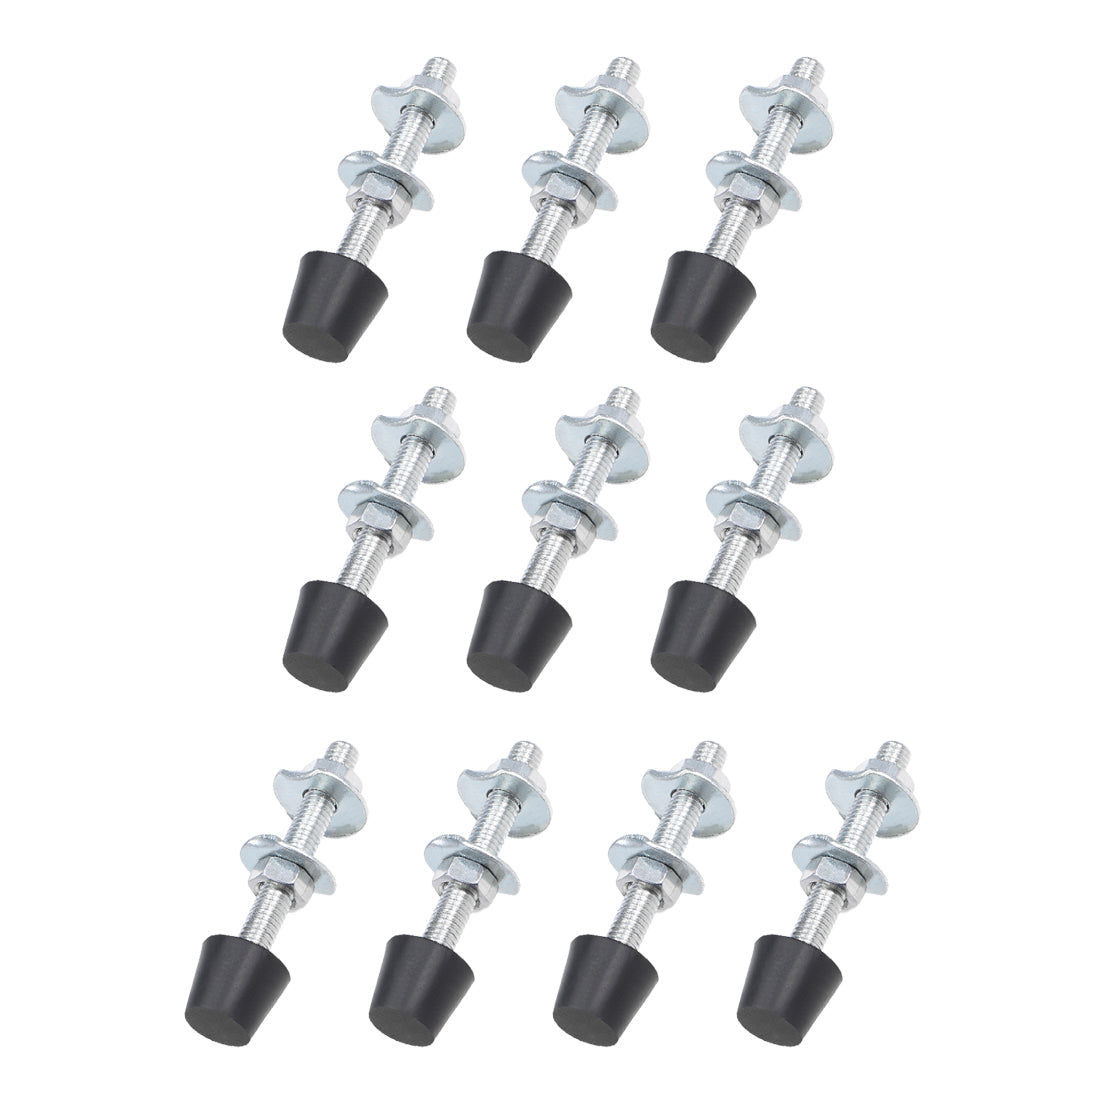 uxcell Uxcell M5x47mm Carbon Steel Toggle Clamp Screw Assembly with Rounded Spindle Tip 10pcs